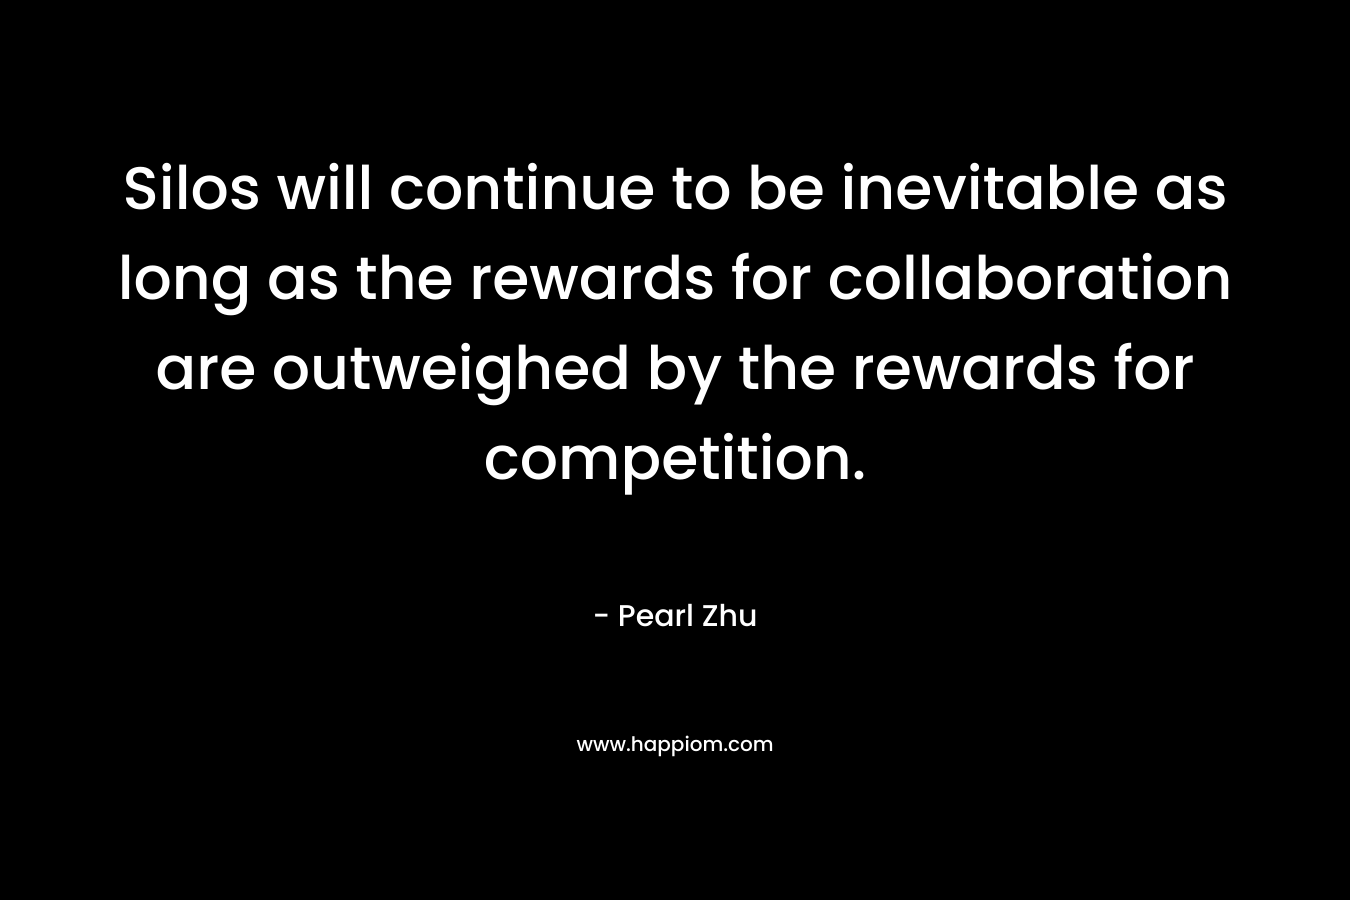 Silos will continue to be inevitable as long as the rewards for collaboration are outweighed by the rewards for competition. – Pearl Zhu